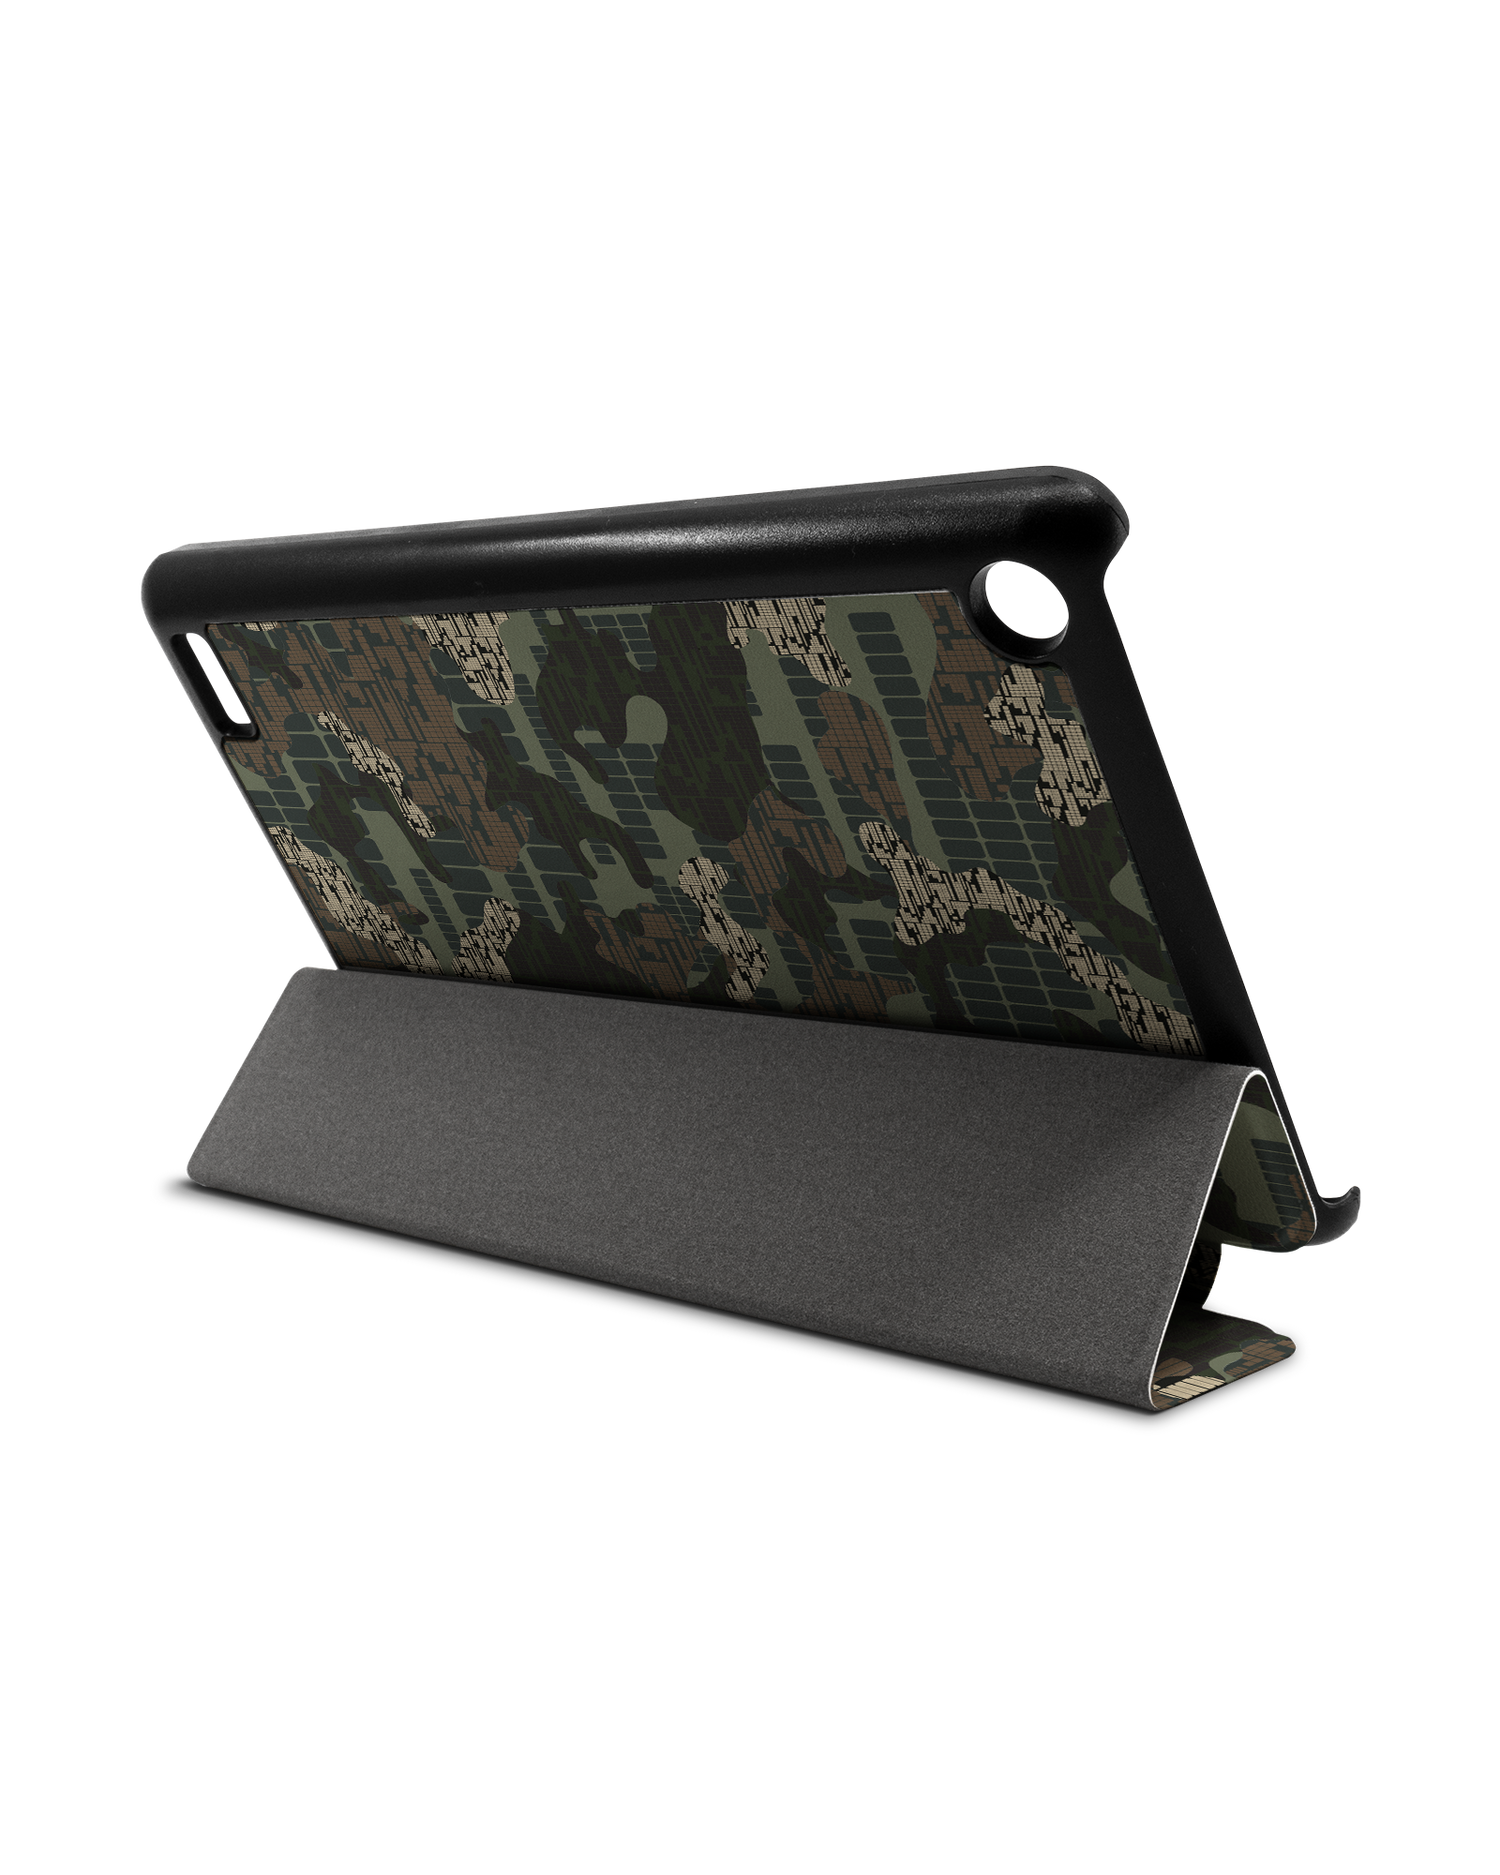 Green Camo Mix Tablet Smart Case for Amazon Fire 7: Used as Stand